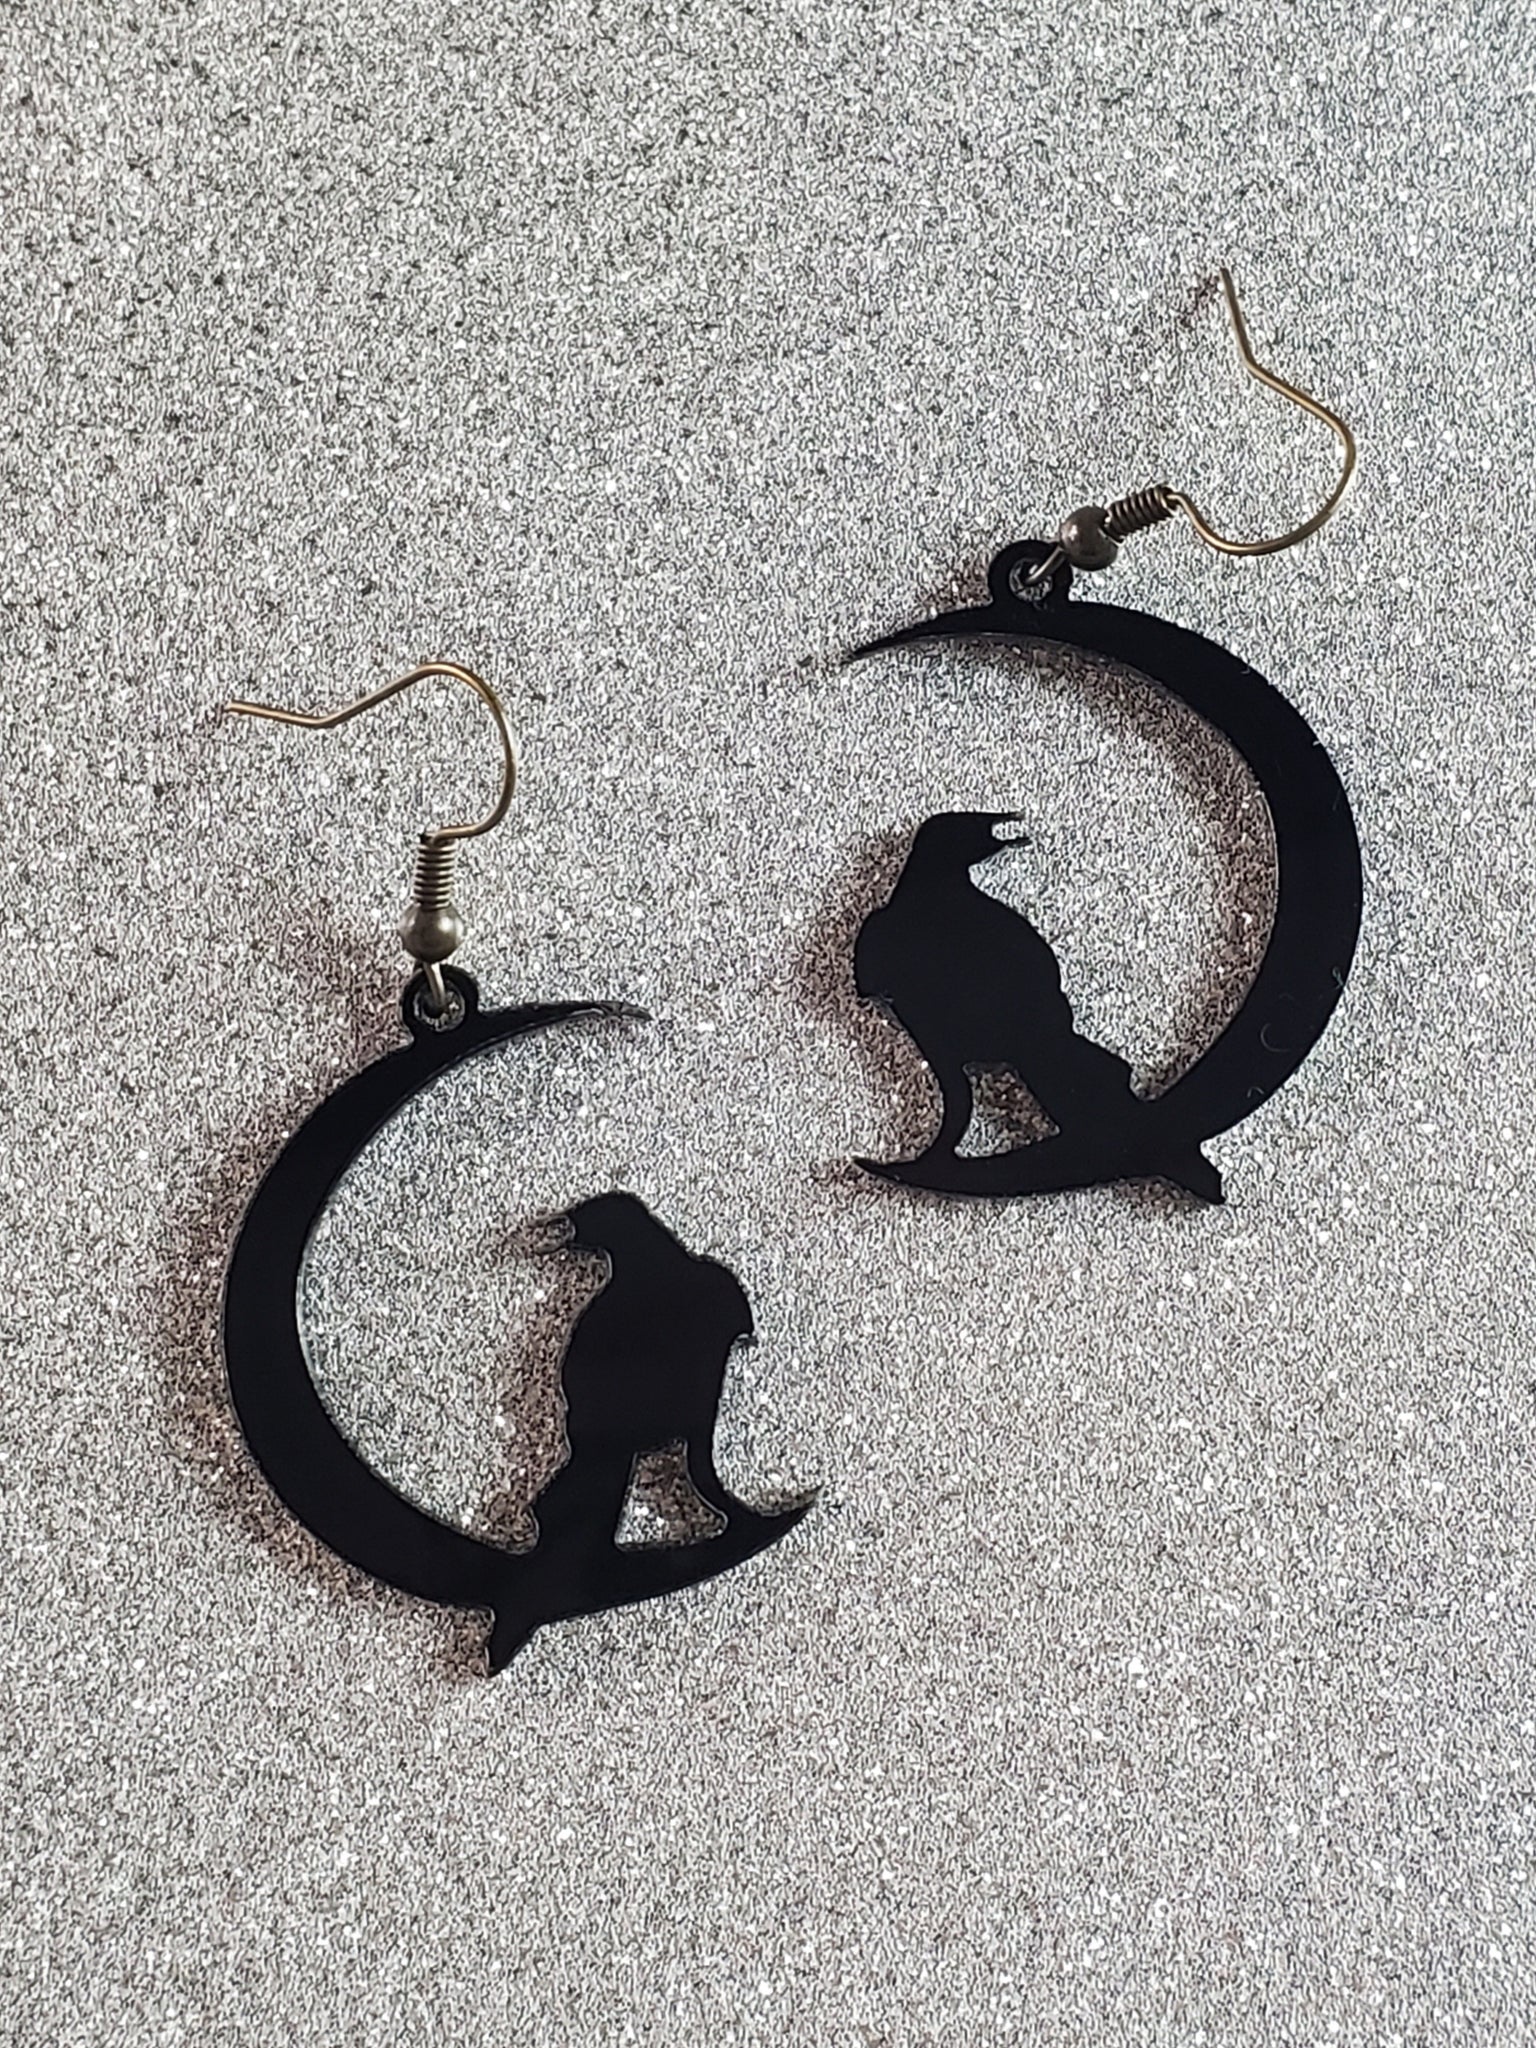 Laser cut acrylic dangle earrings in the shape of a crow perched on a crescent moon. Shown laying flat